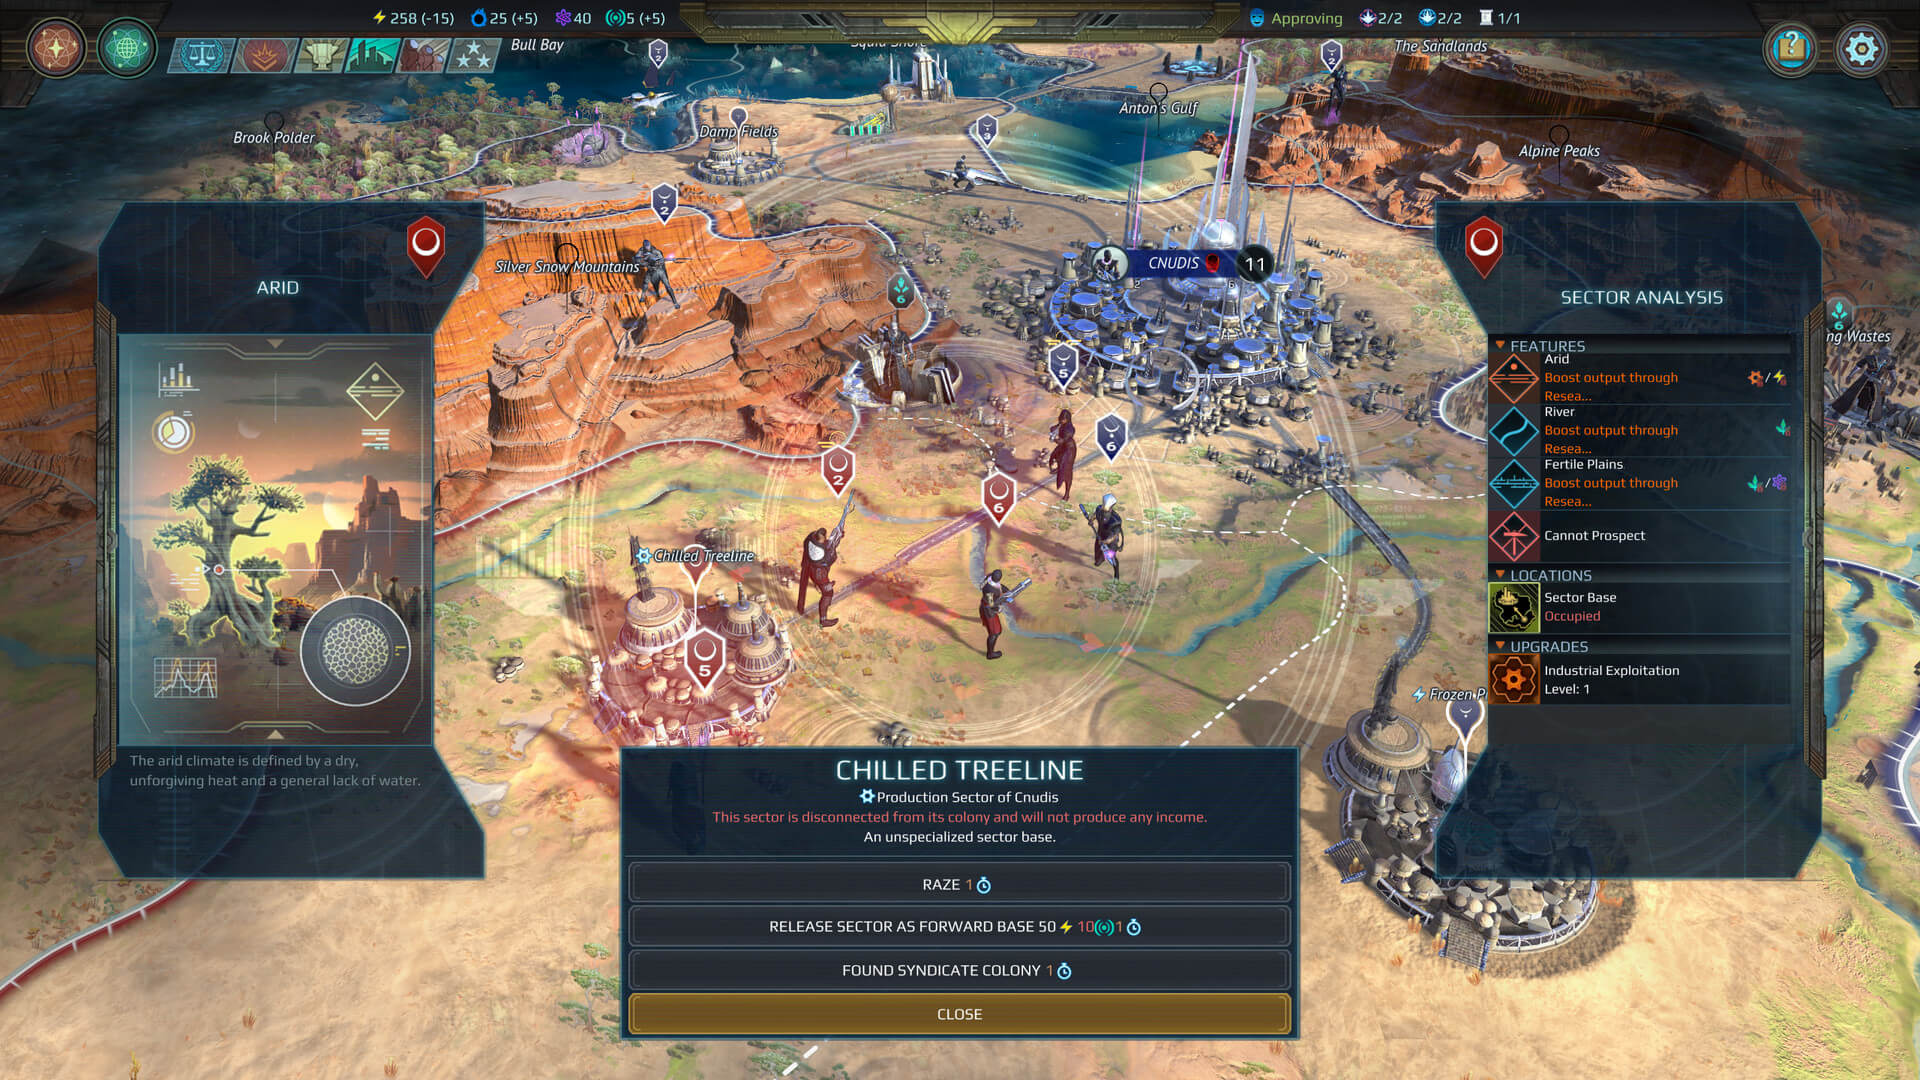 age of wonders: planetfall deluxe edition gameplay